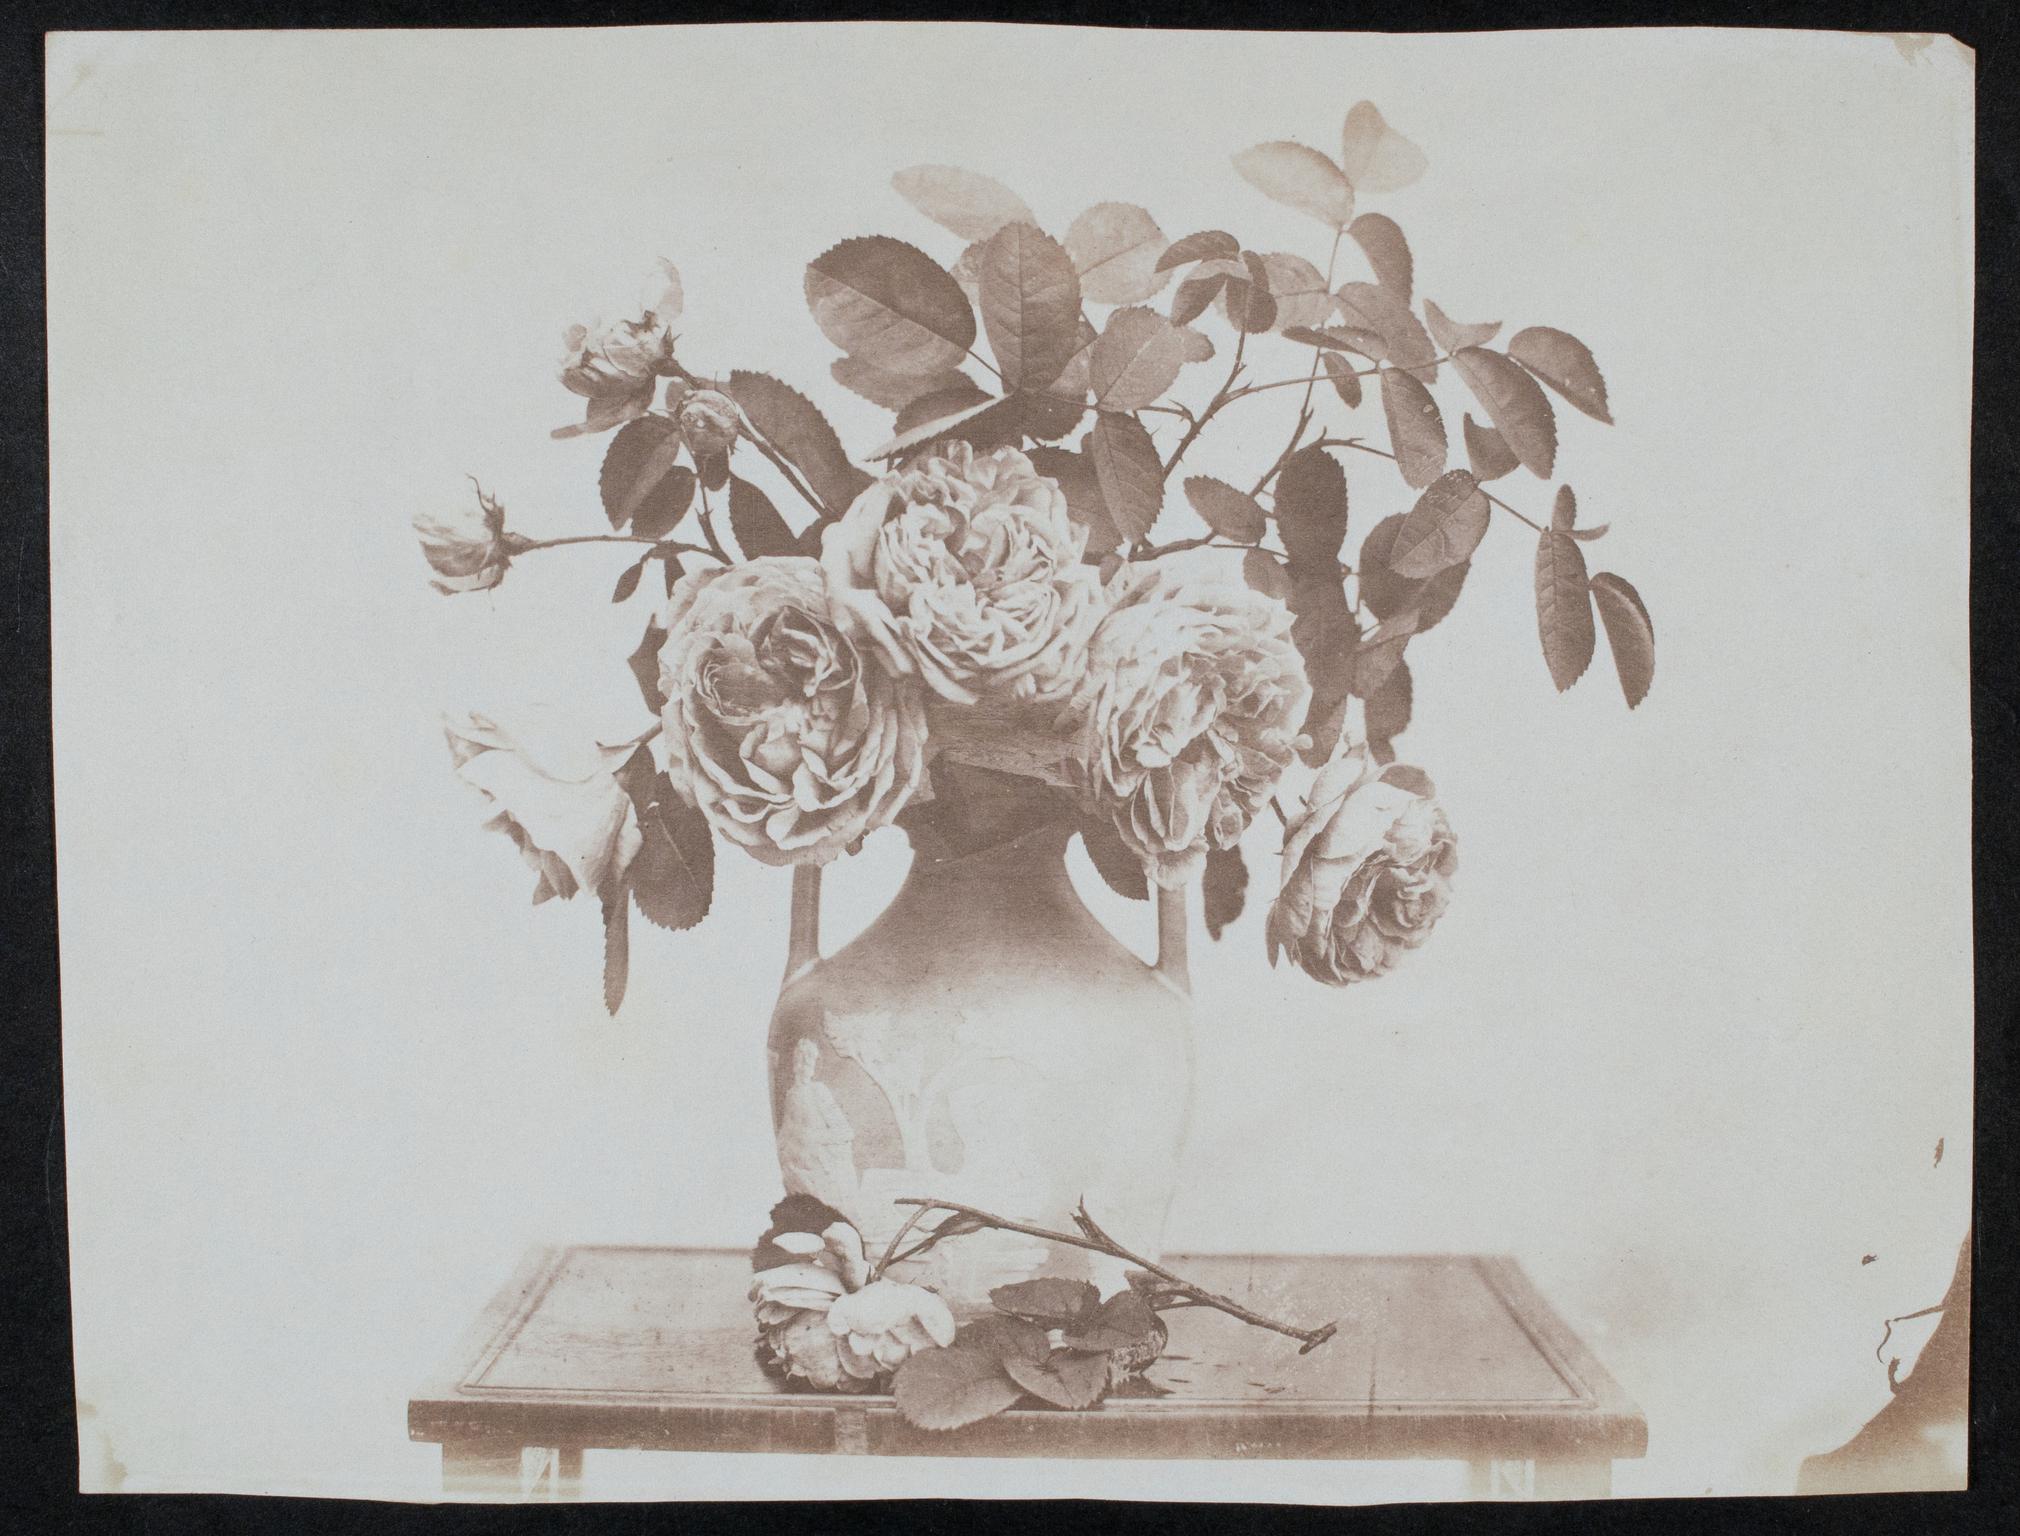 Vase of roses, photograph